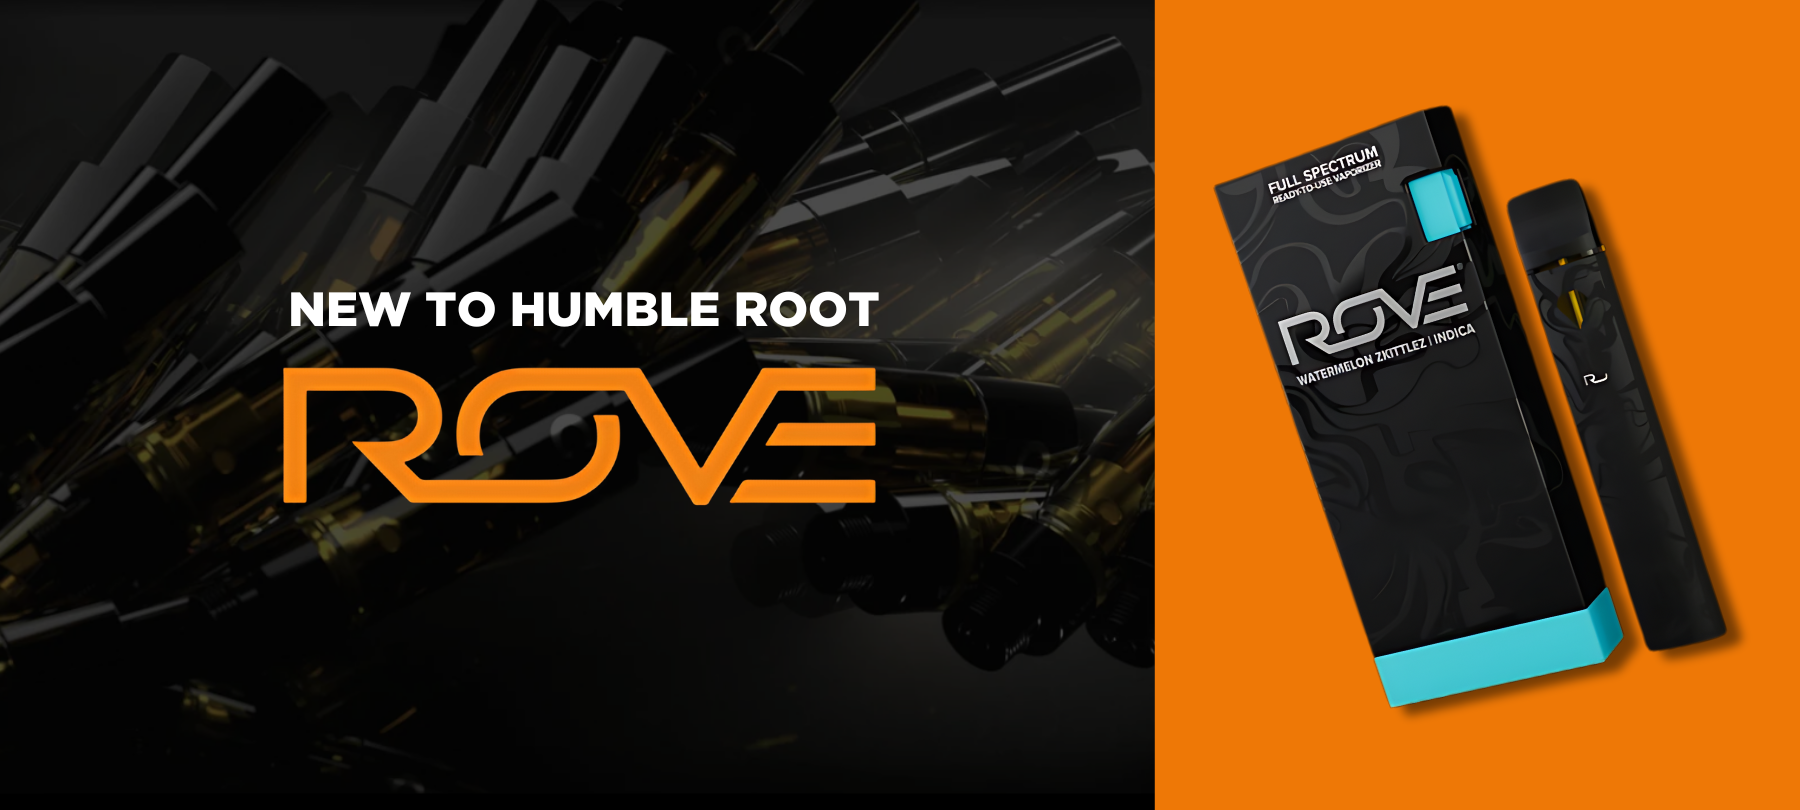 Rove is now available at Humble Root